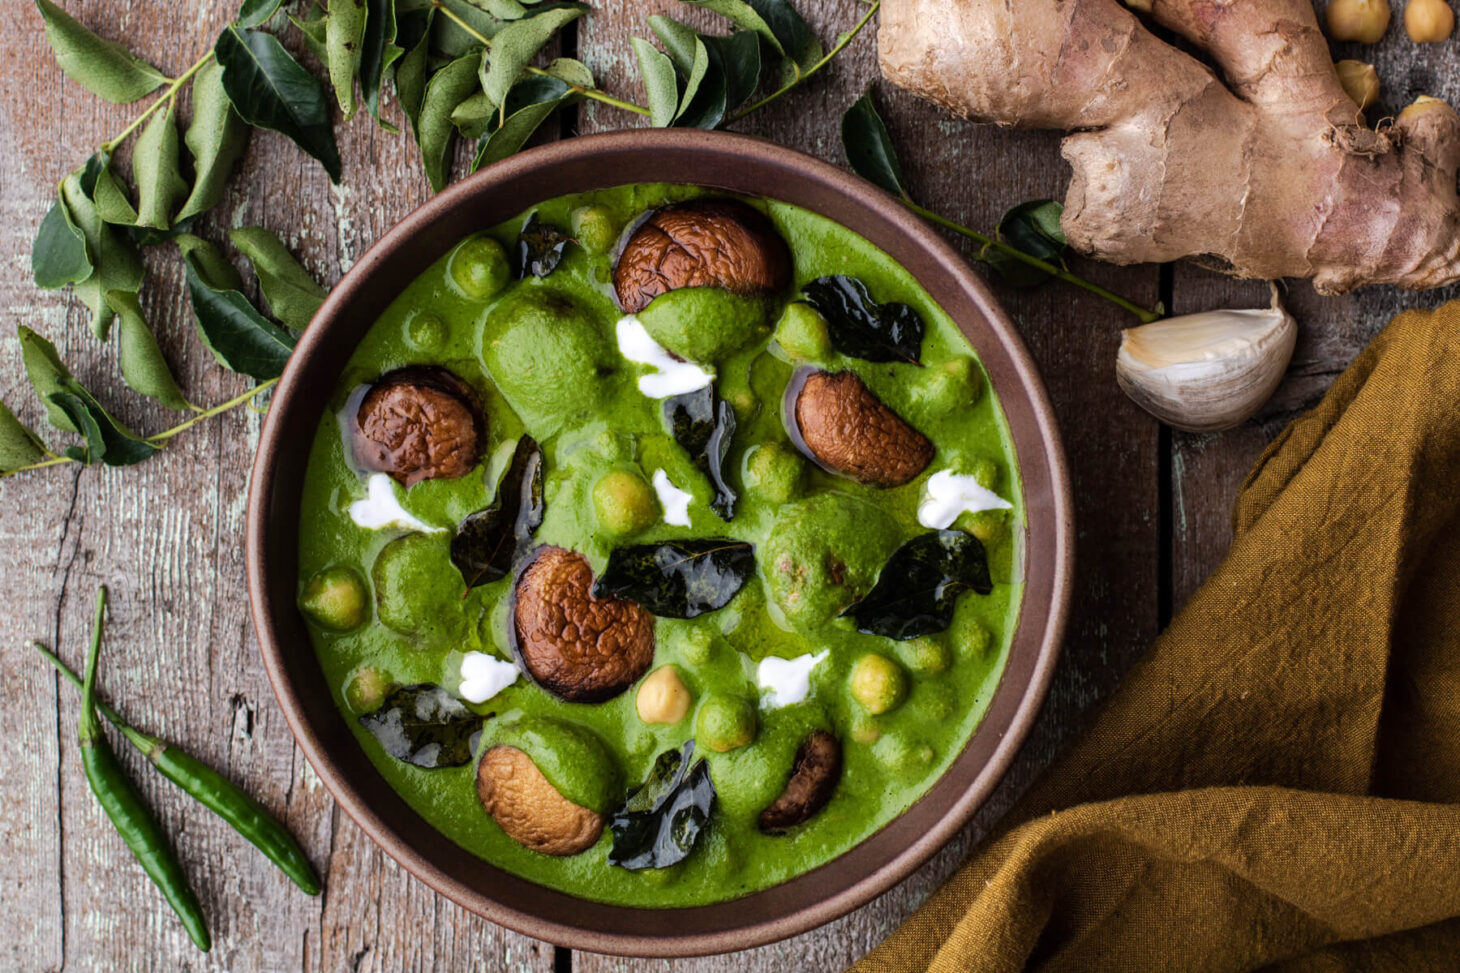 A vibrant green spinach curry with mushrooms, chickpeas, fried curry leaves, and drizzles of coconut cream in a brown bowl.